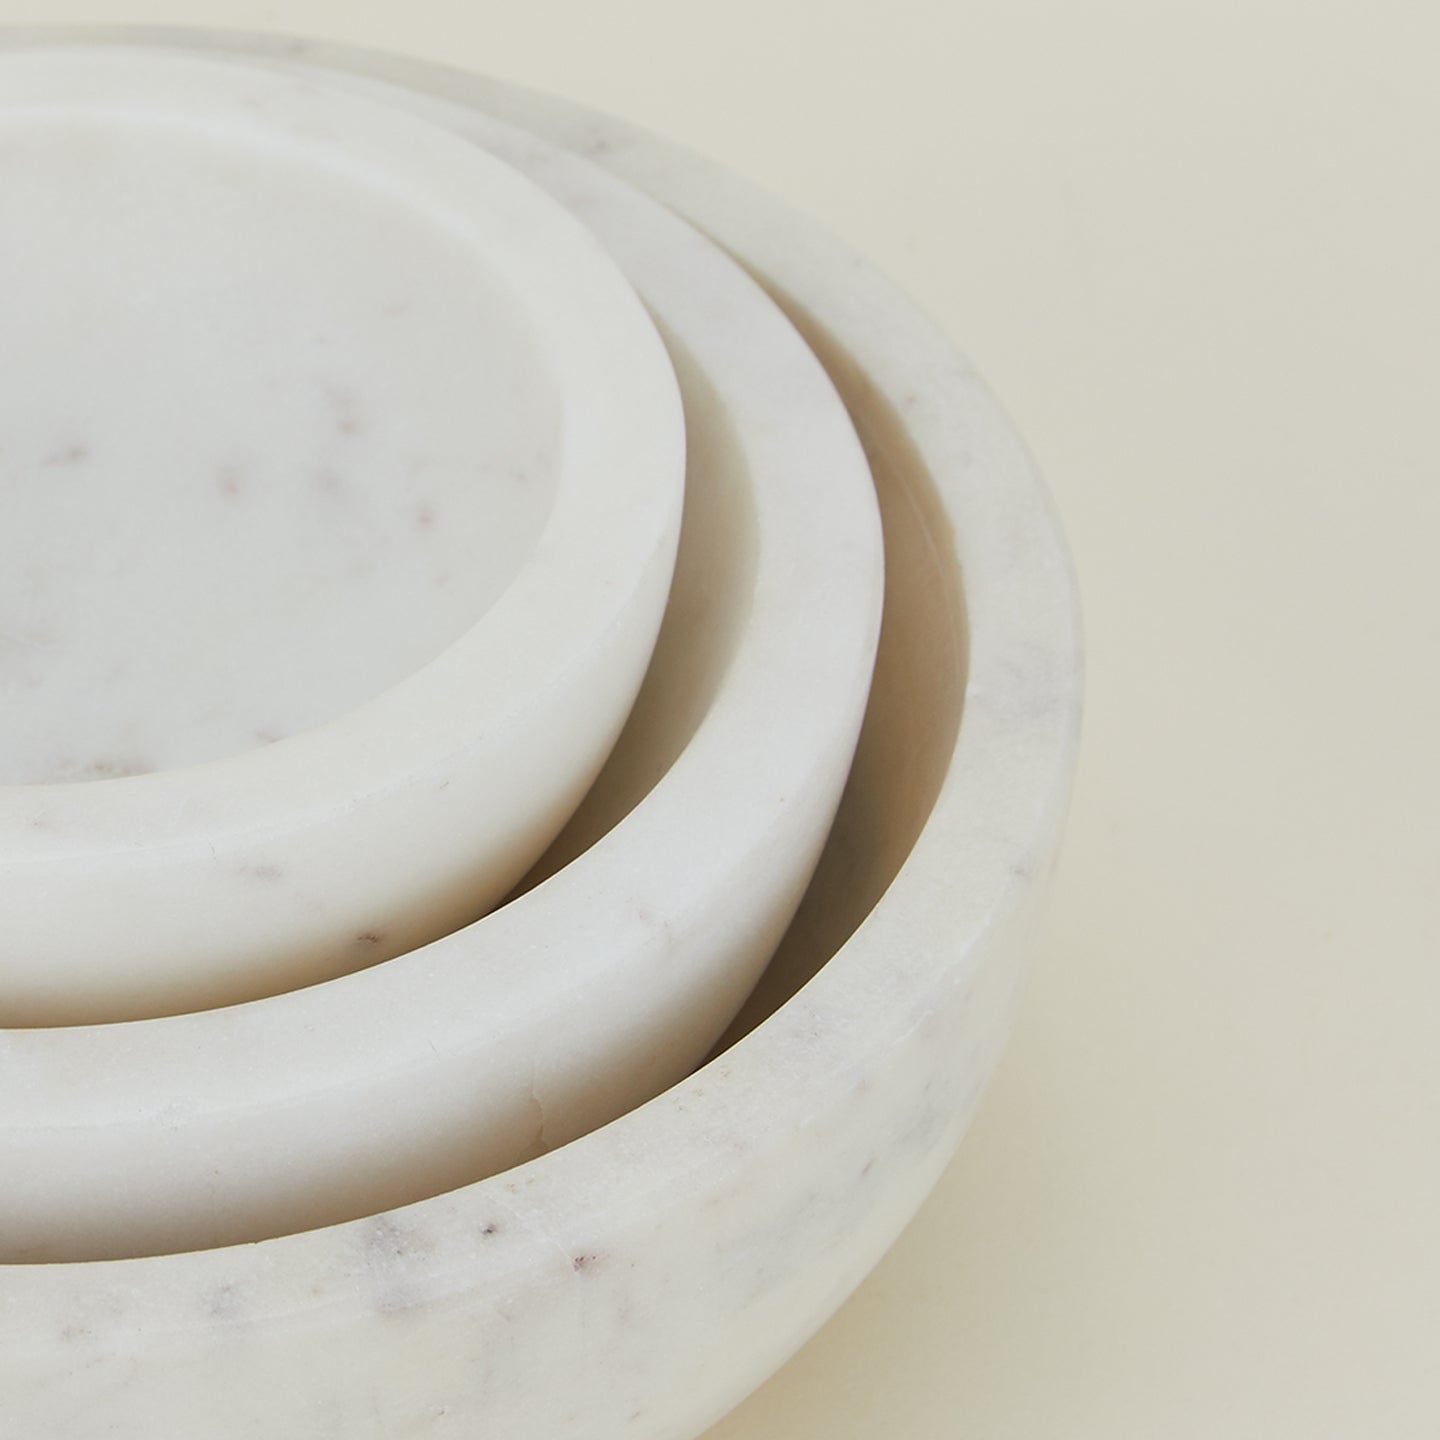 Simple Marble Bowl - White